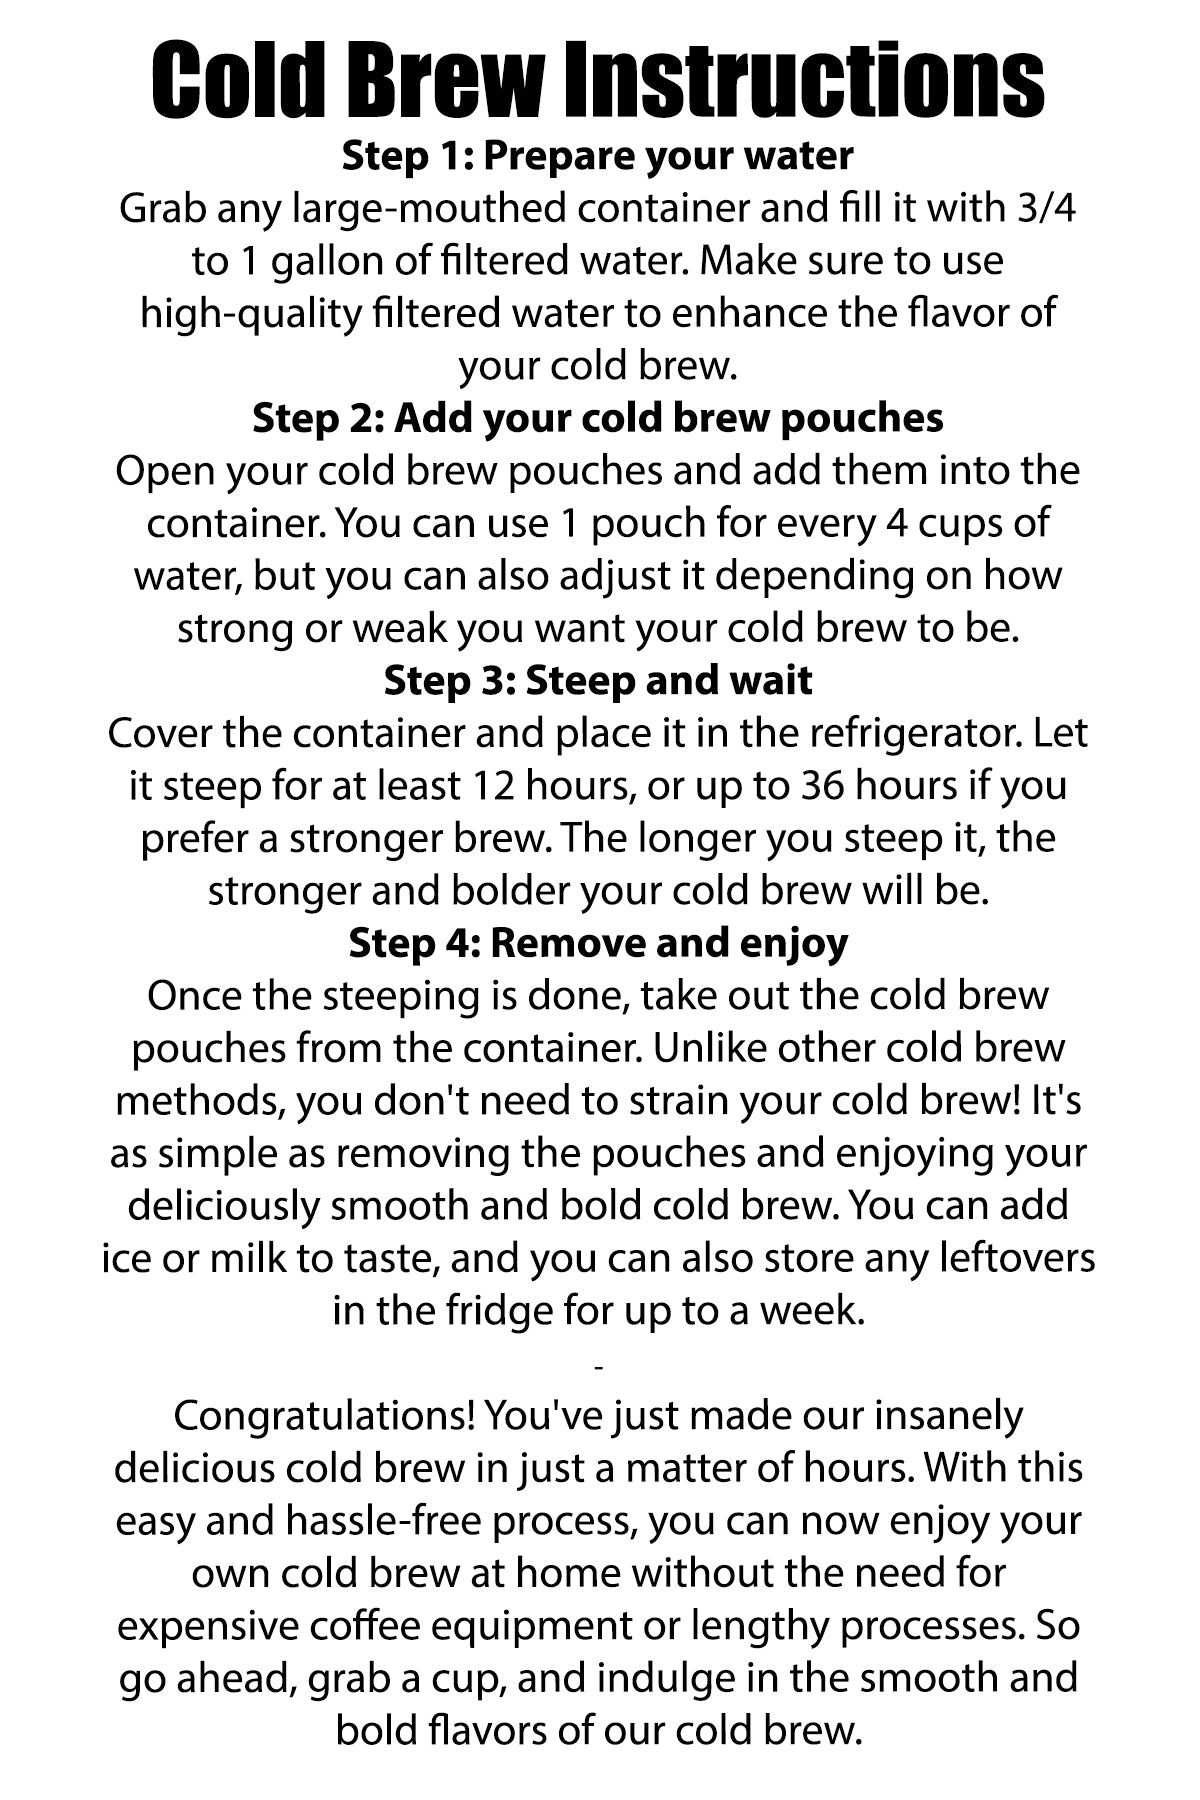 best cold brew kits online and best cold brew recipe online